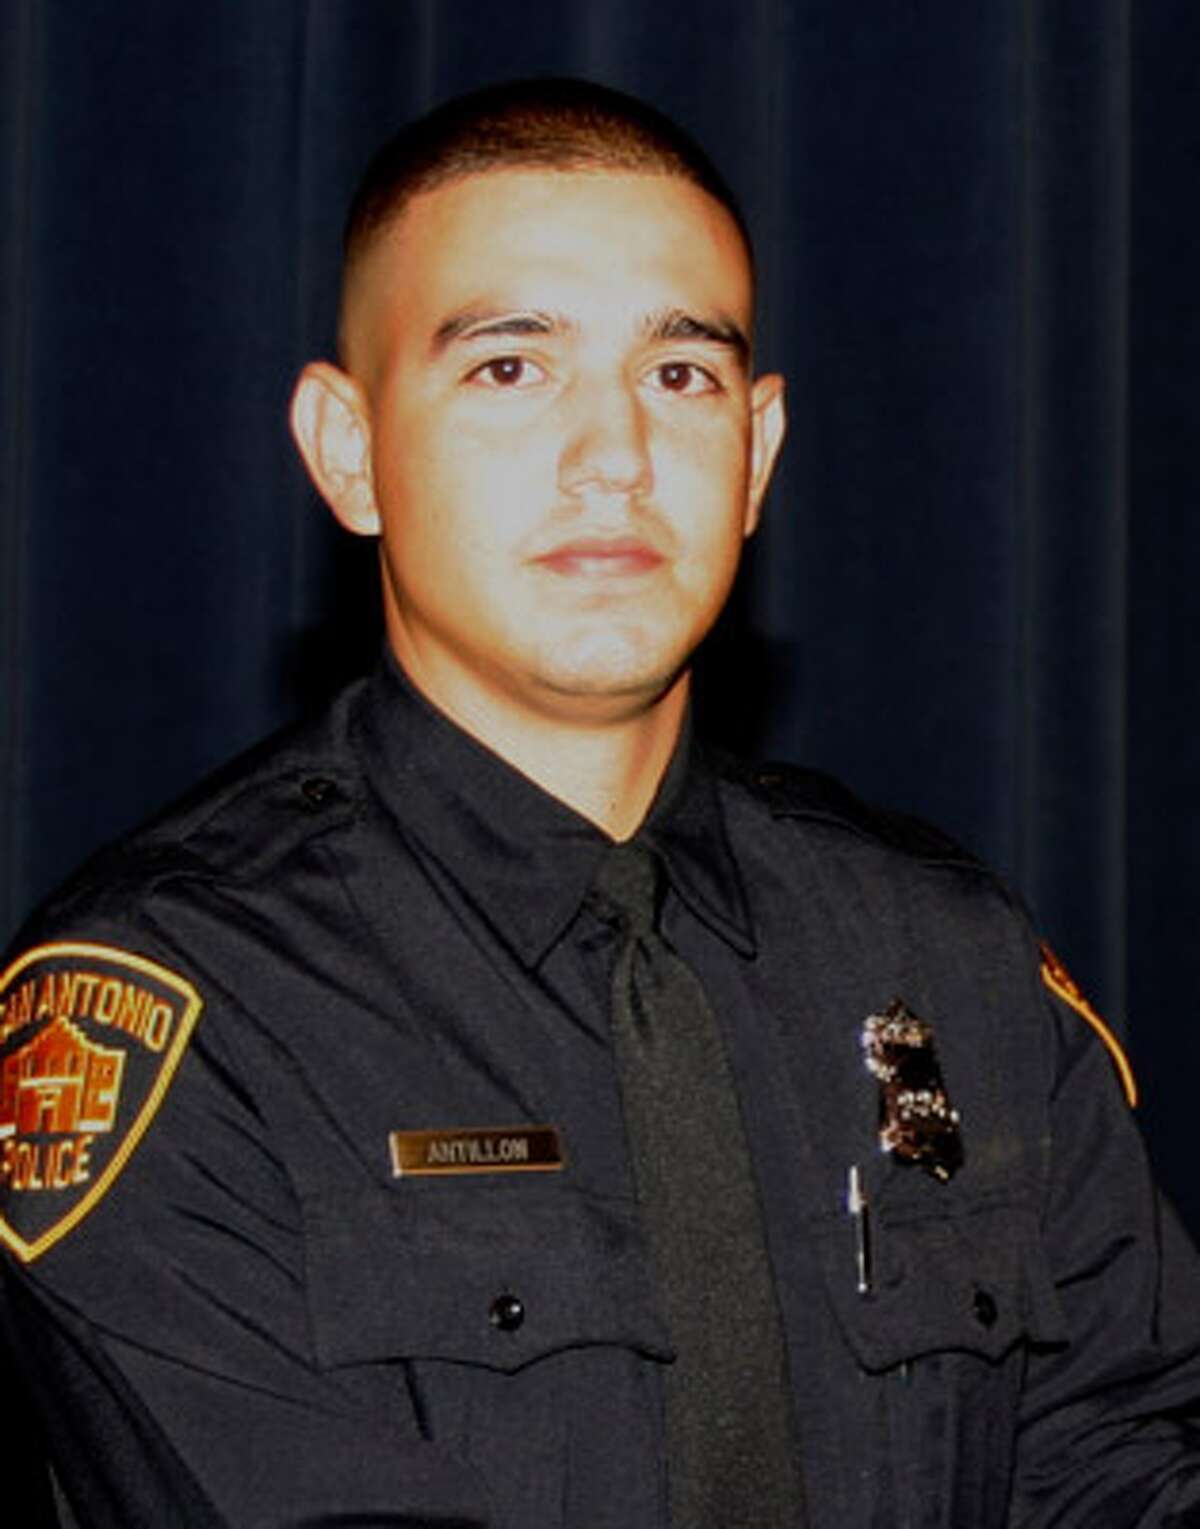 Officer Sergio Antillon: Graduated from the academy Aug. 20.